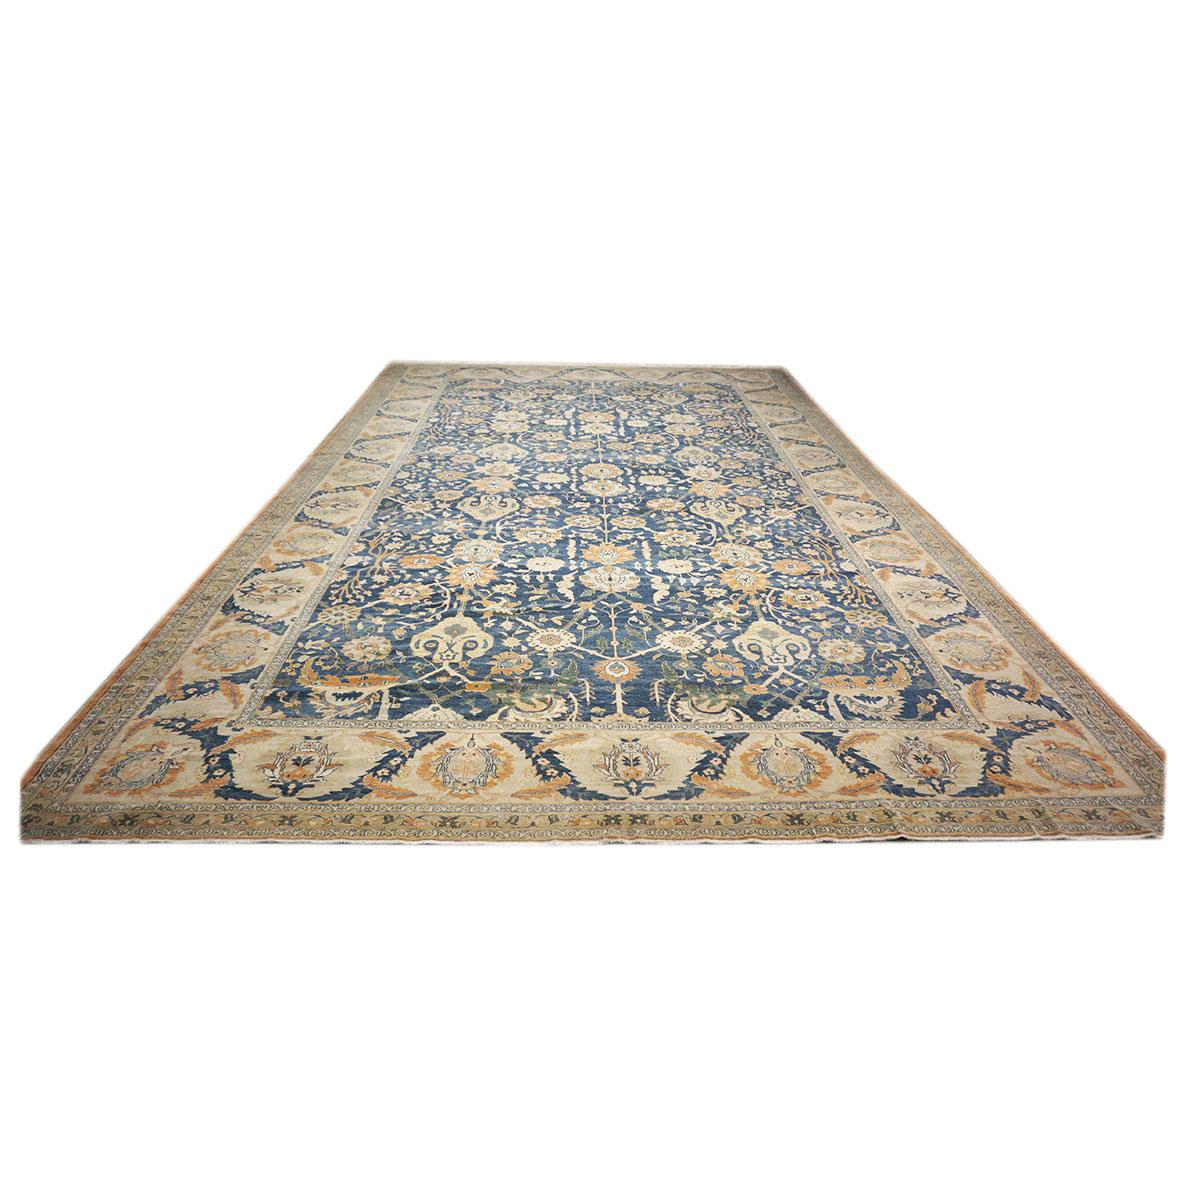 Ashly Fine rugs present a 1970s Vintage Egyptian Sultanabad 13'x21'2